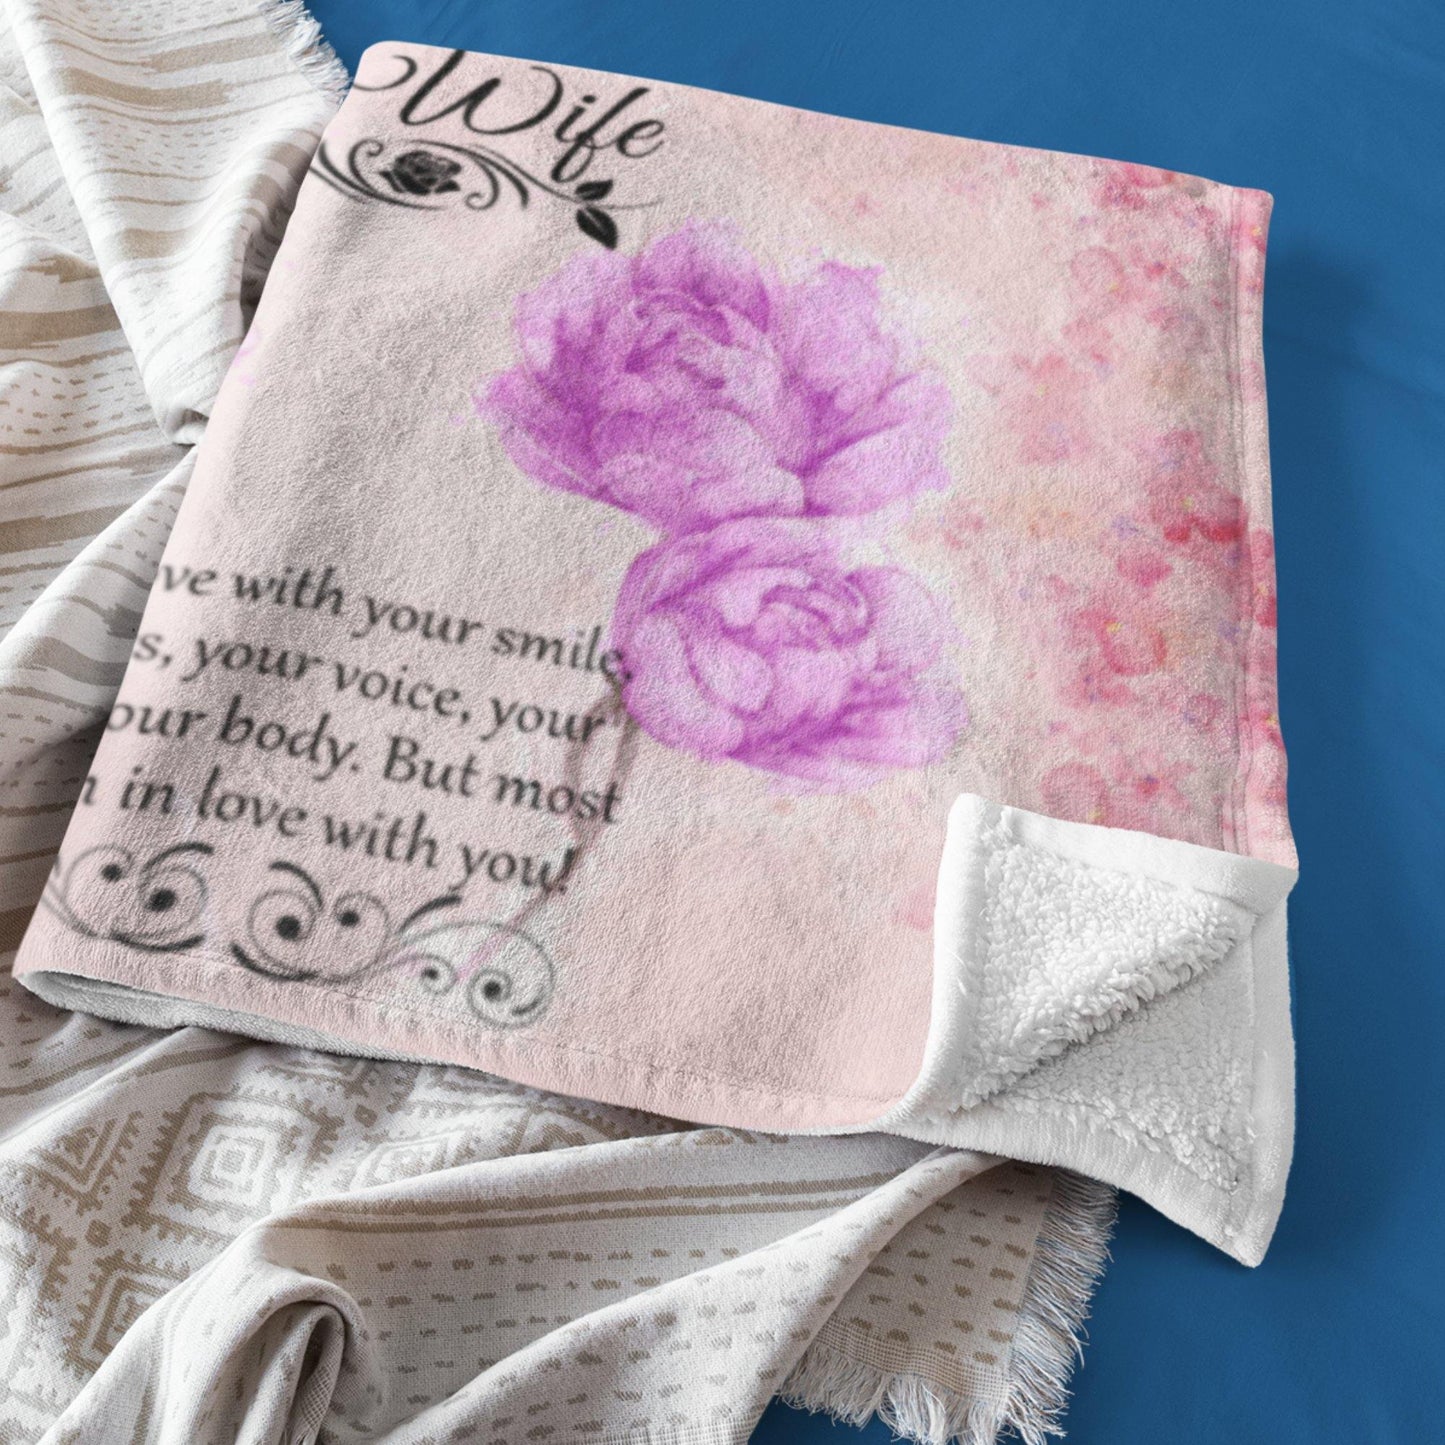 To My Wife Fleece Blanket, I'm In Love With Your Smile - Giftagic